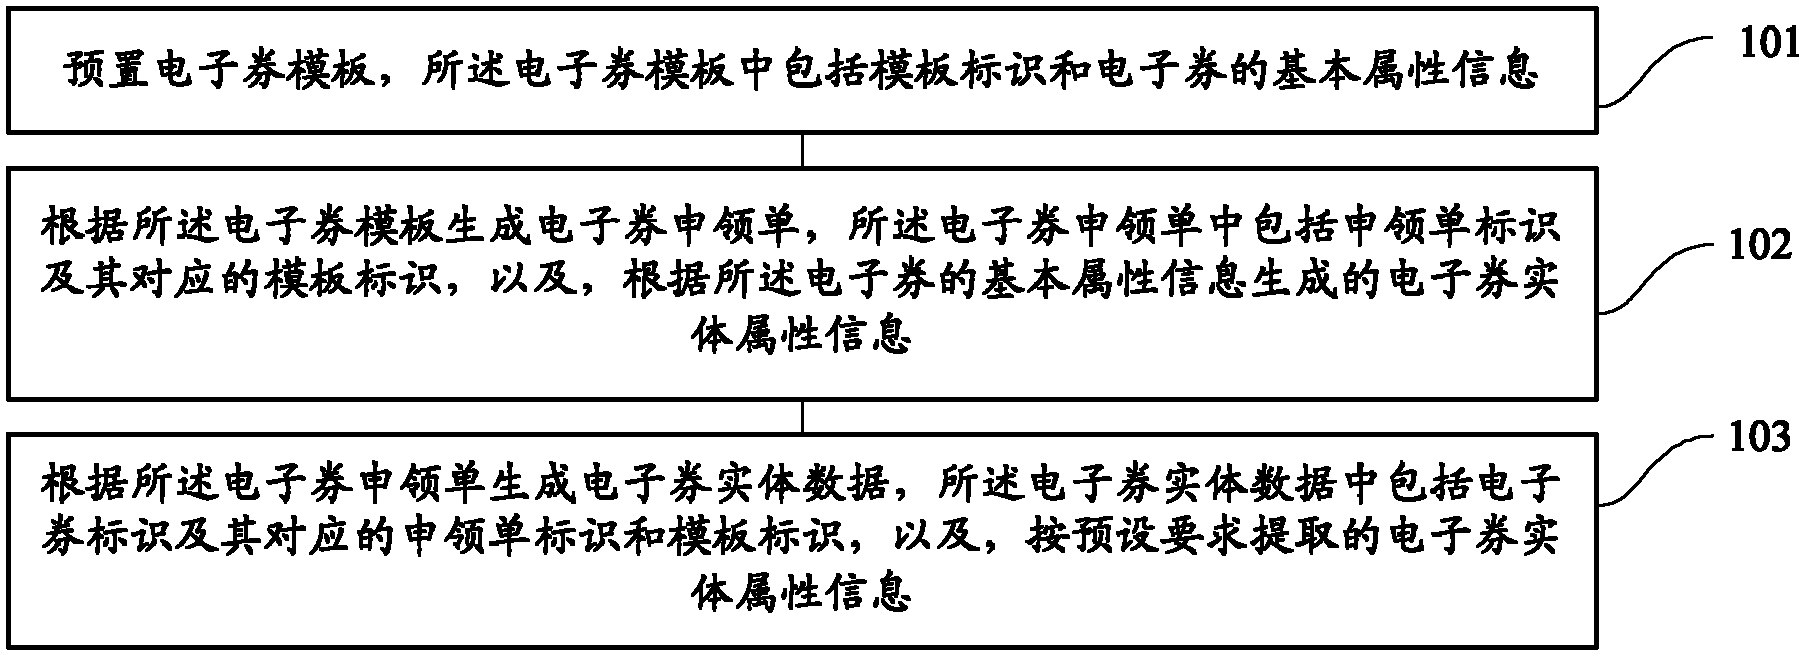 Electronic coupon data generation method and electronic coupon data generation device